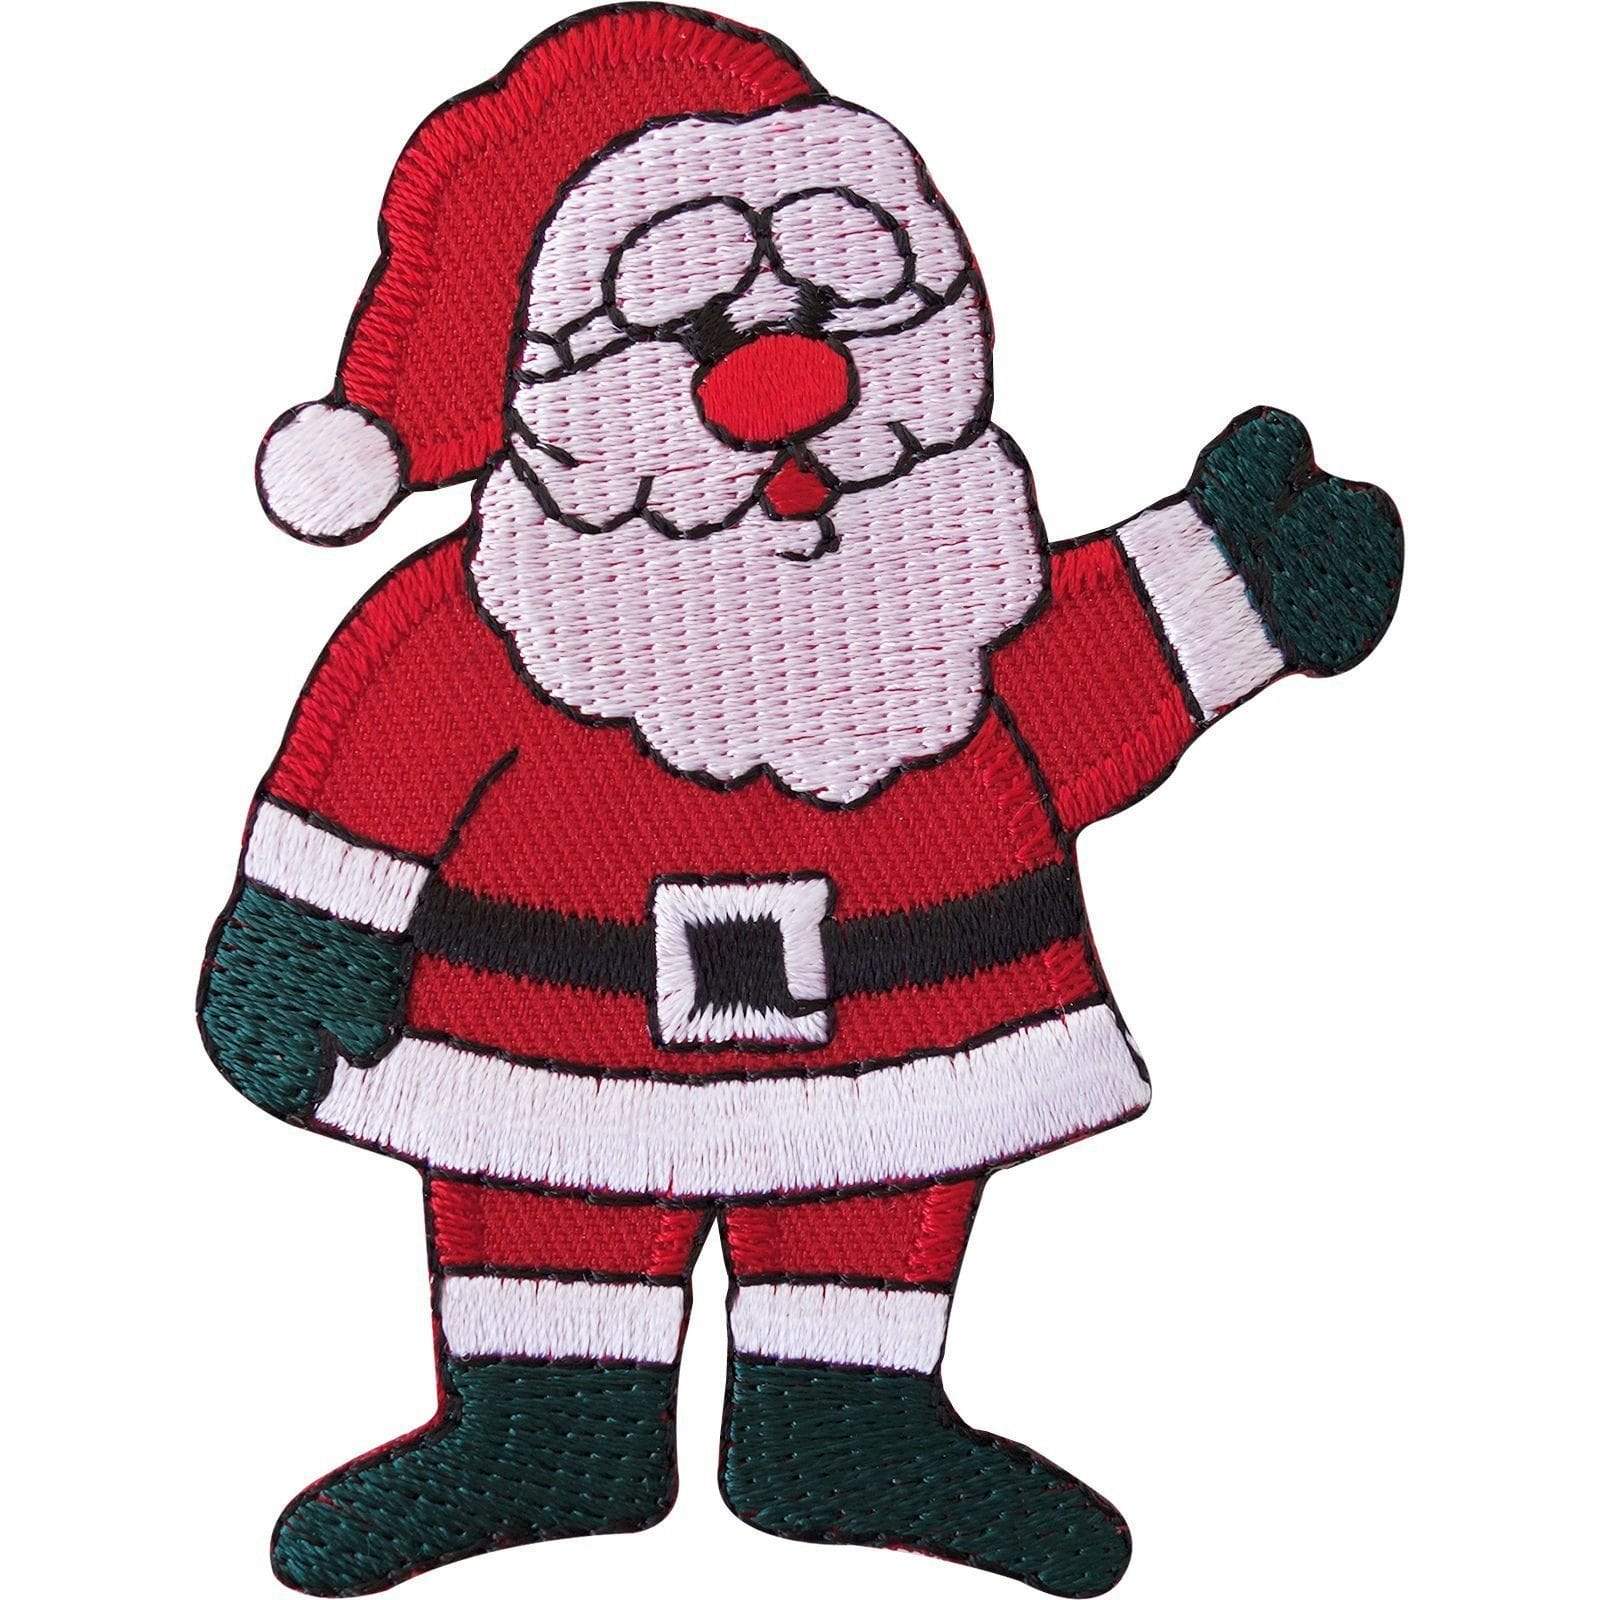  SEWACC 12pcs Christmas Patch Embroidery Santa Claus Patches  Small Coat Patches Clothing Patch Bag Sewing Sticker Small Craft Patches  Coats DIY Craft Patches Appliance Computer Polyester